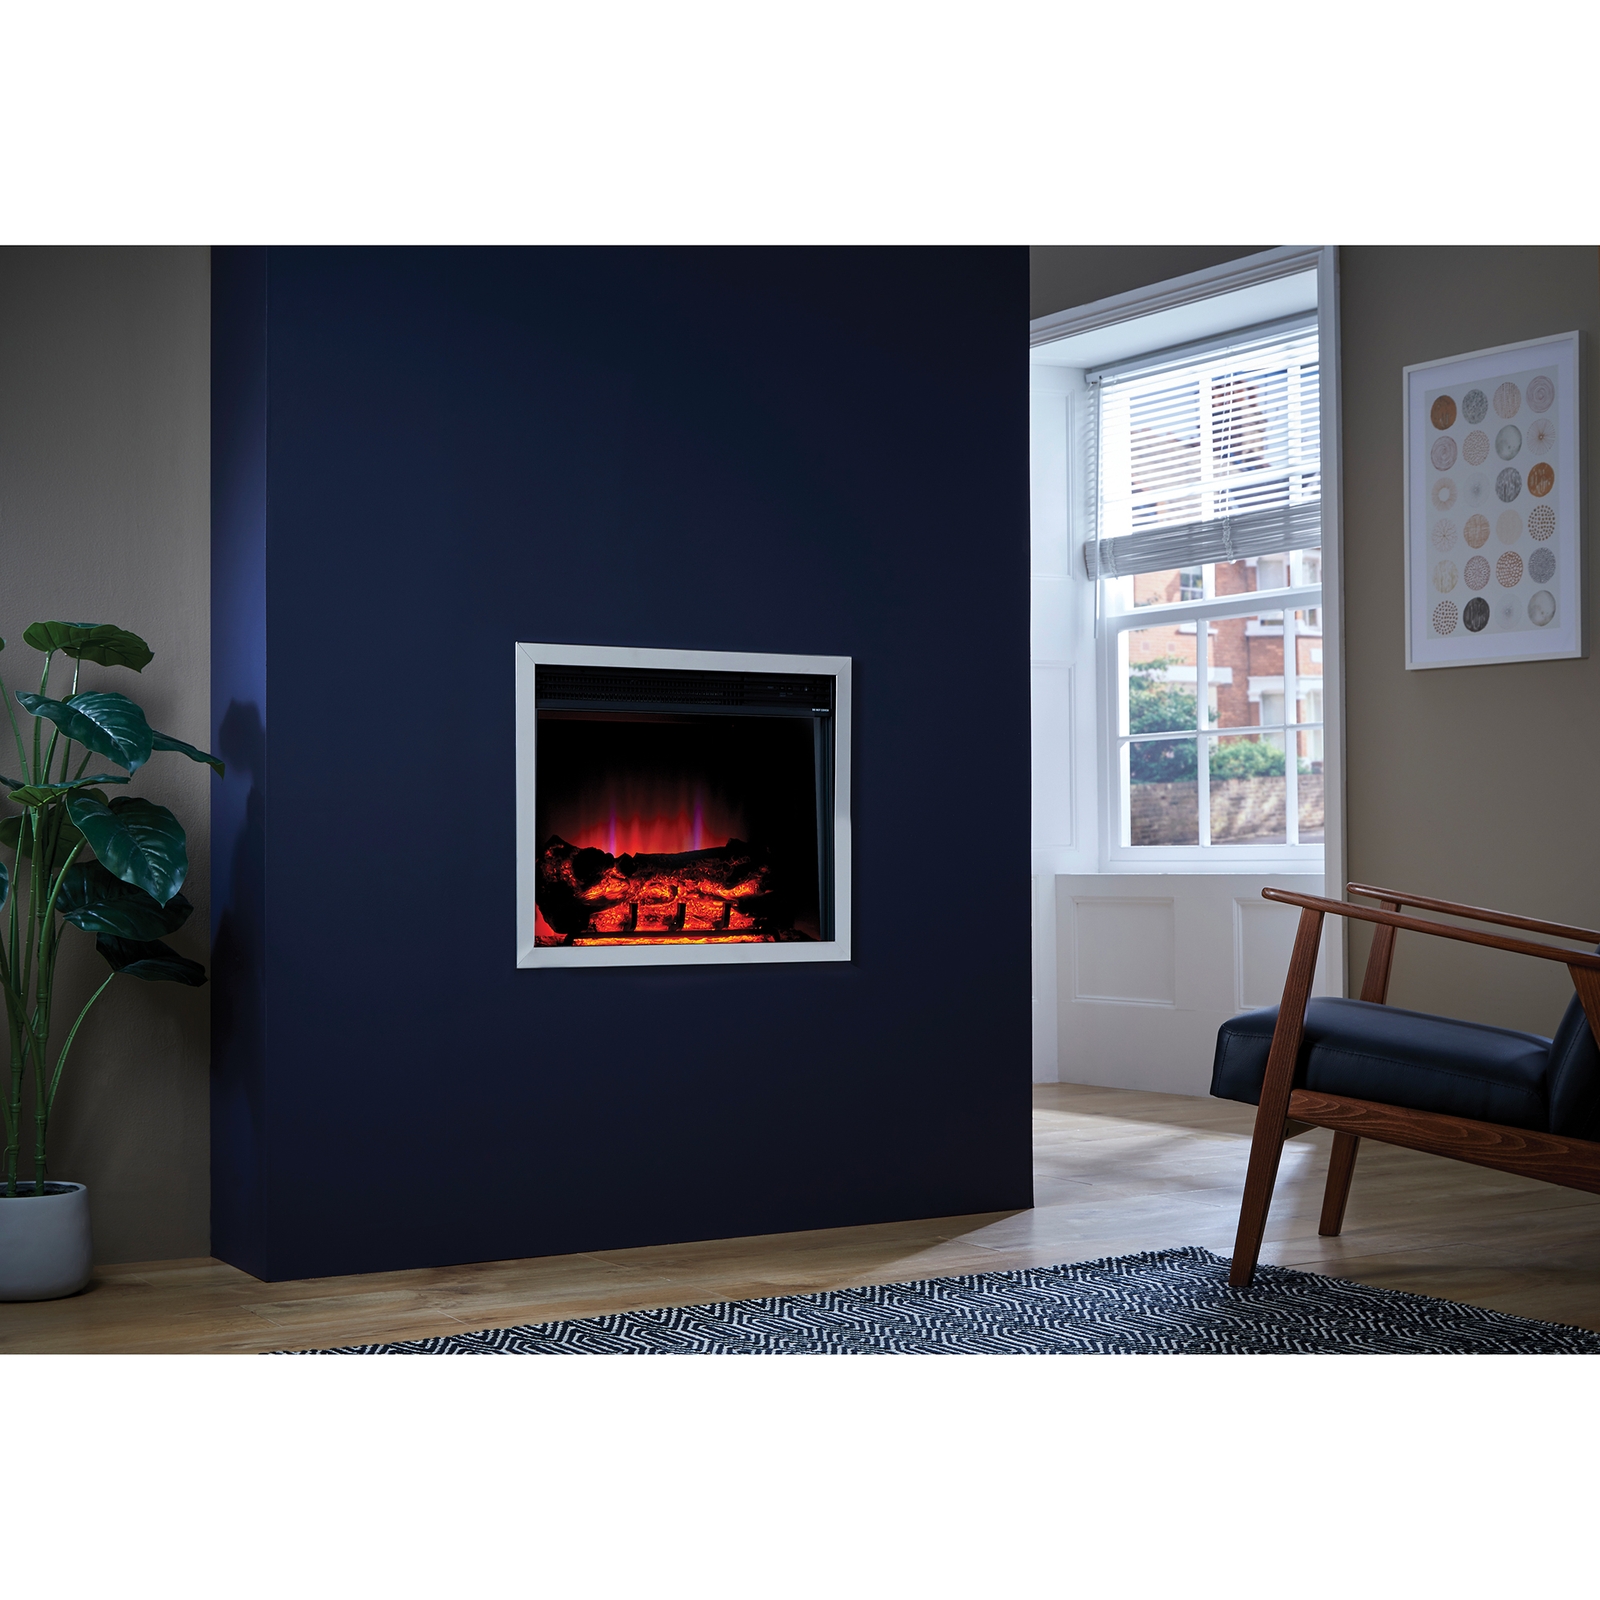 Suncrest Sonar Wall Mounted Hole-In-Wall Electric Fire with Remote Control